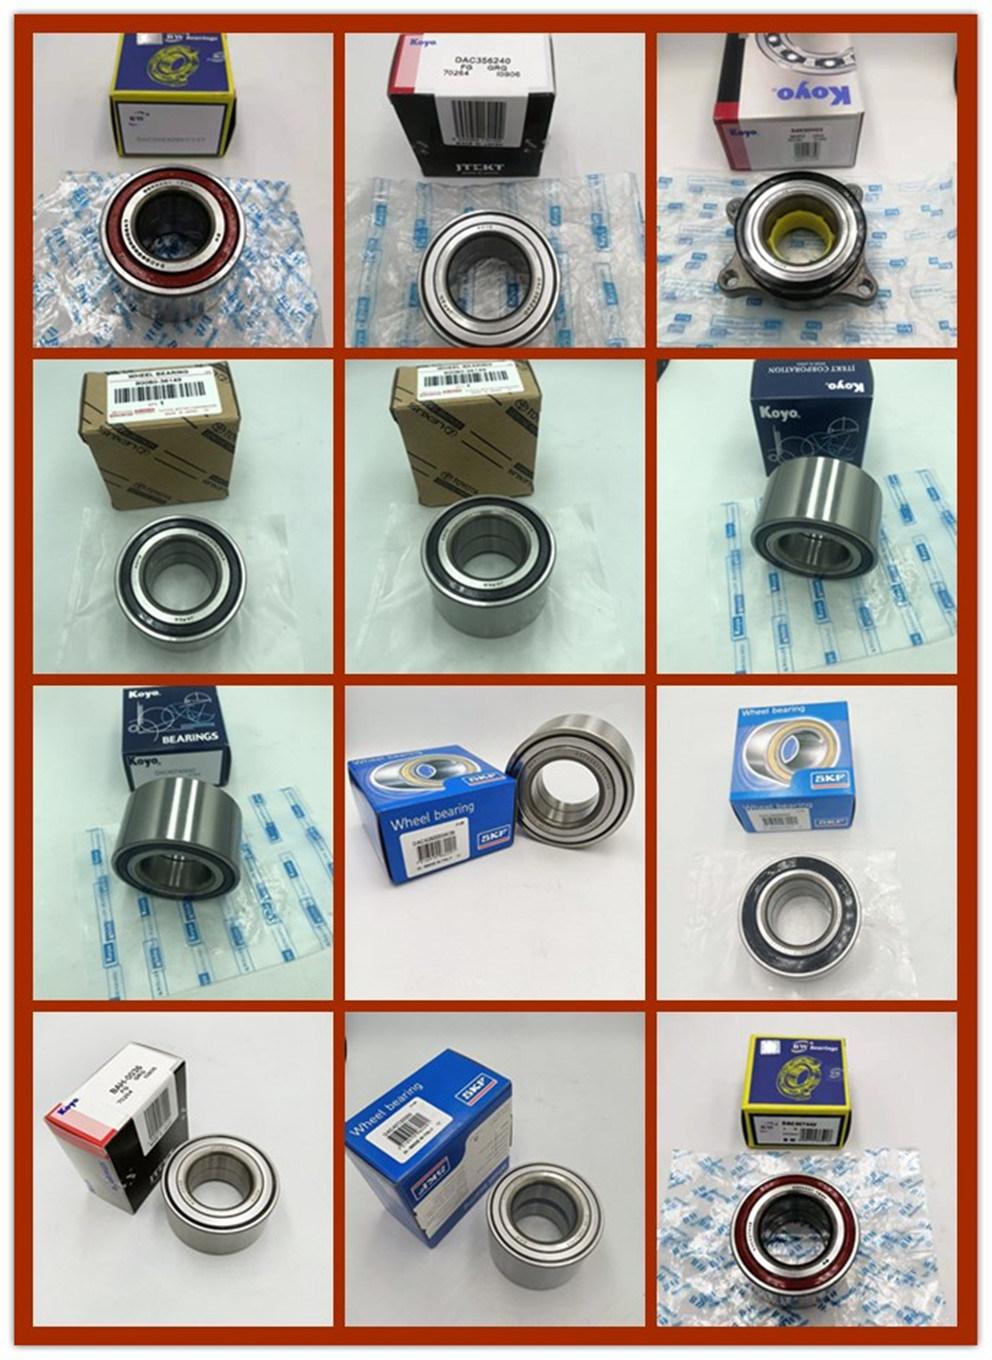 40215-D0100 C301 0009804202 517201001 Vkhb2272 40215-D0100 Auto Bearing for Nissan Audi Auto Parts with Good Quality